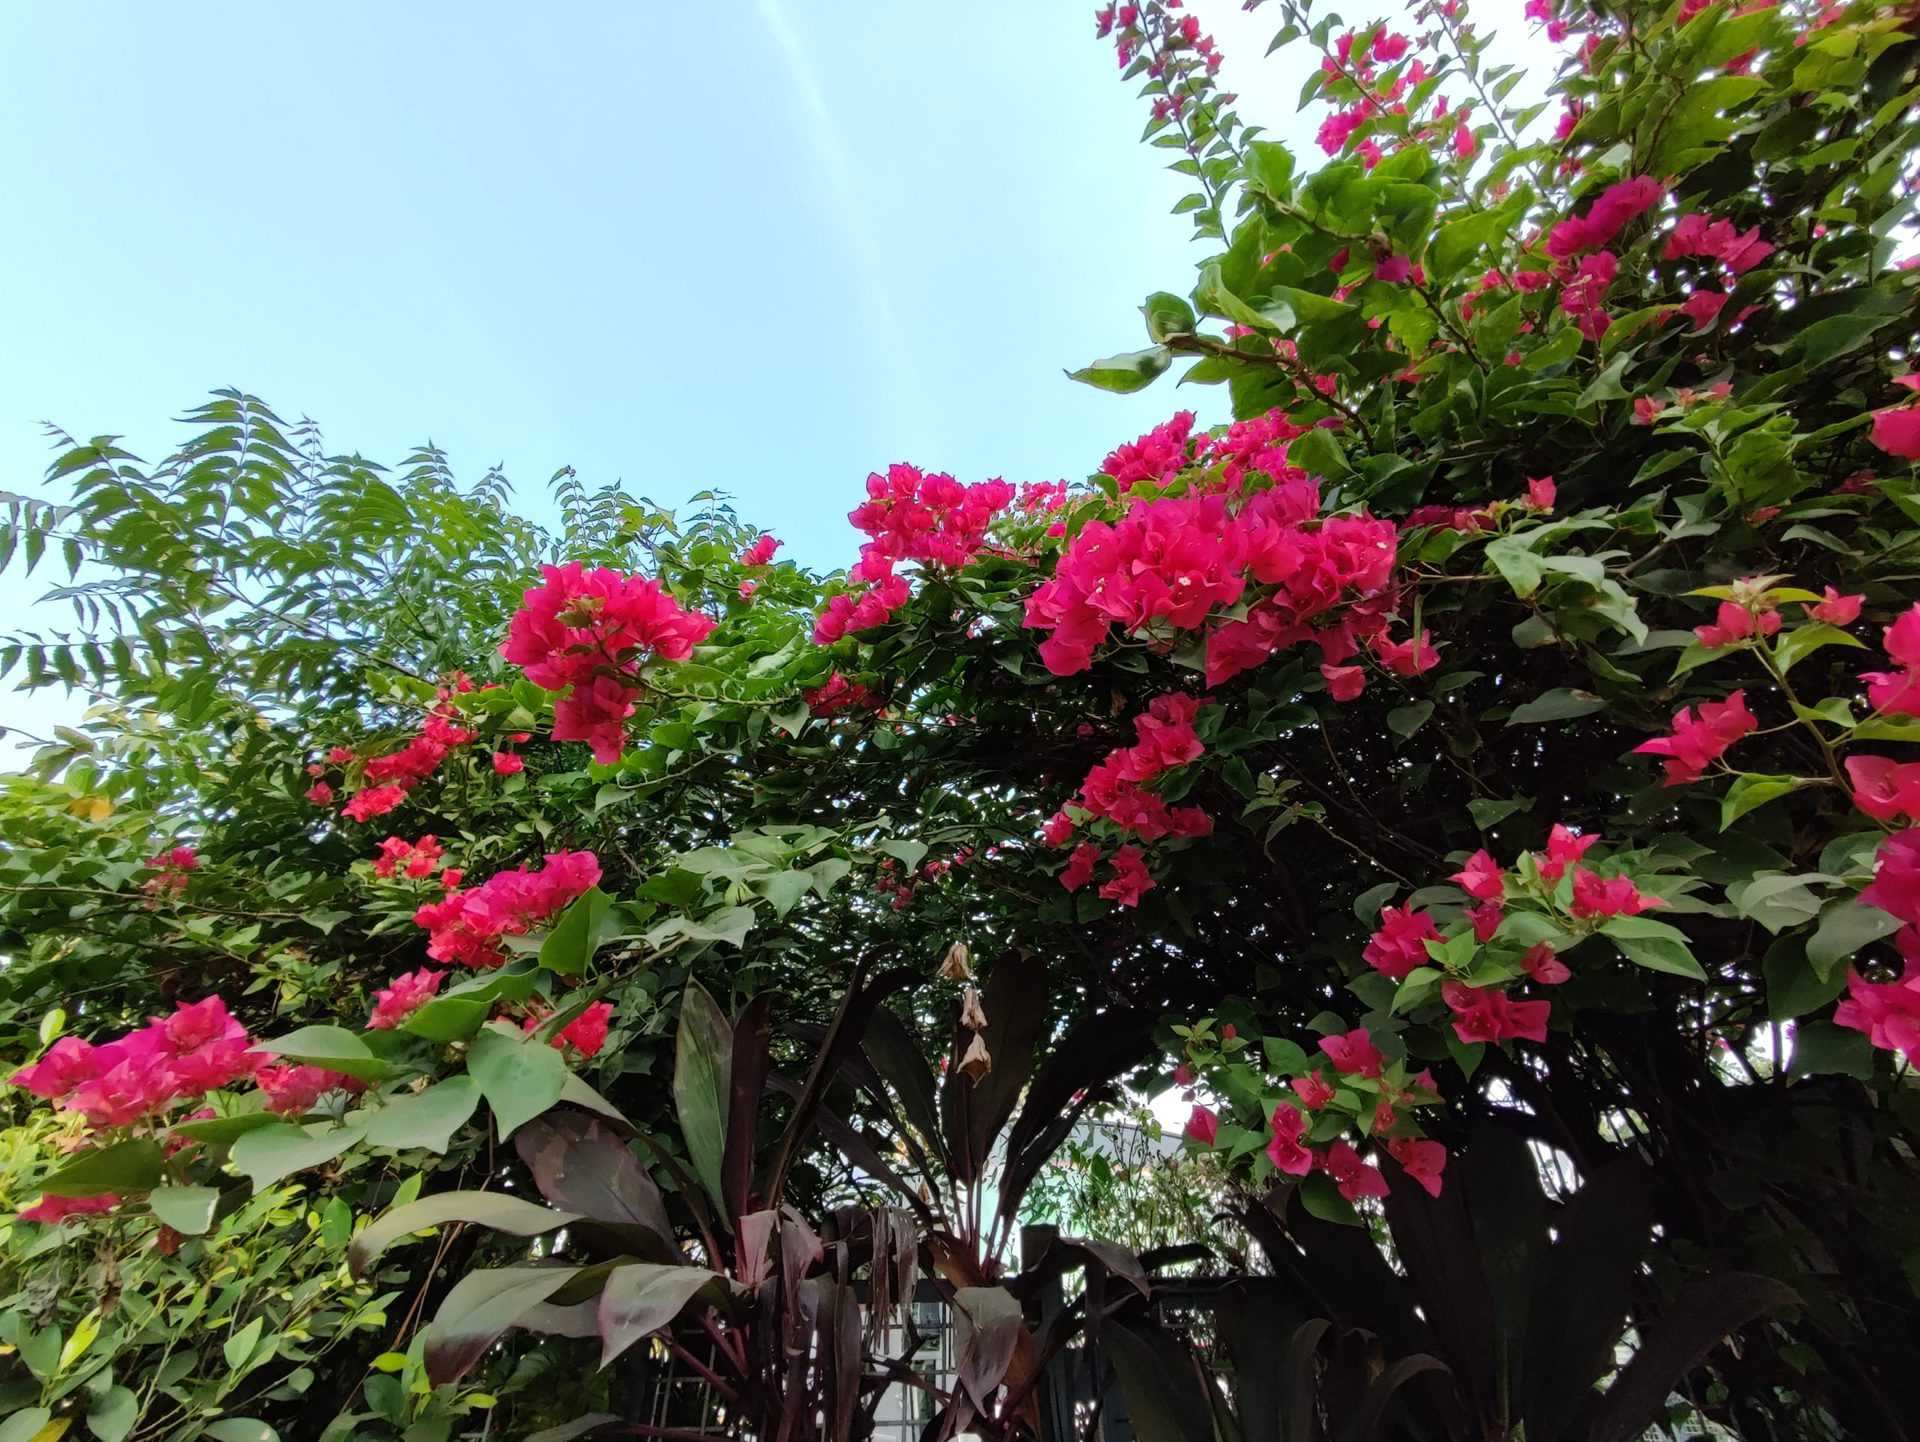 Ultra-wide camera sample showcasing flowers and leaves against a blue sky